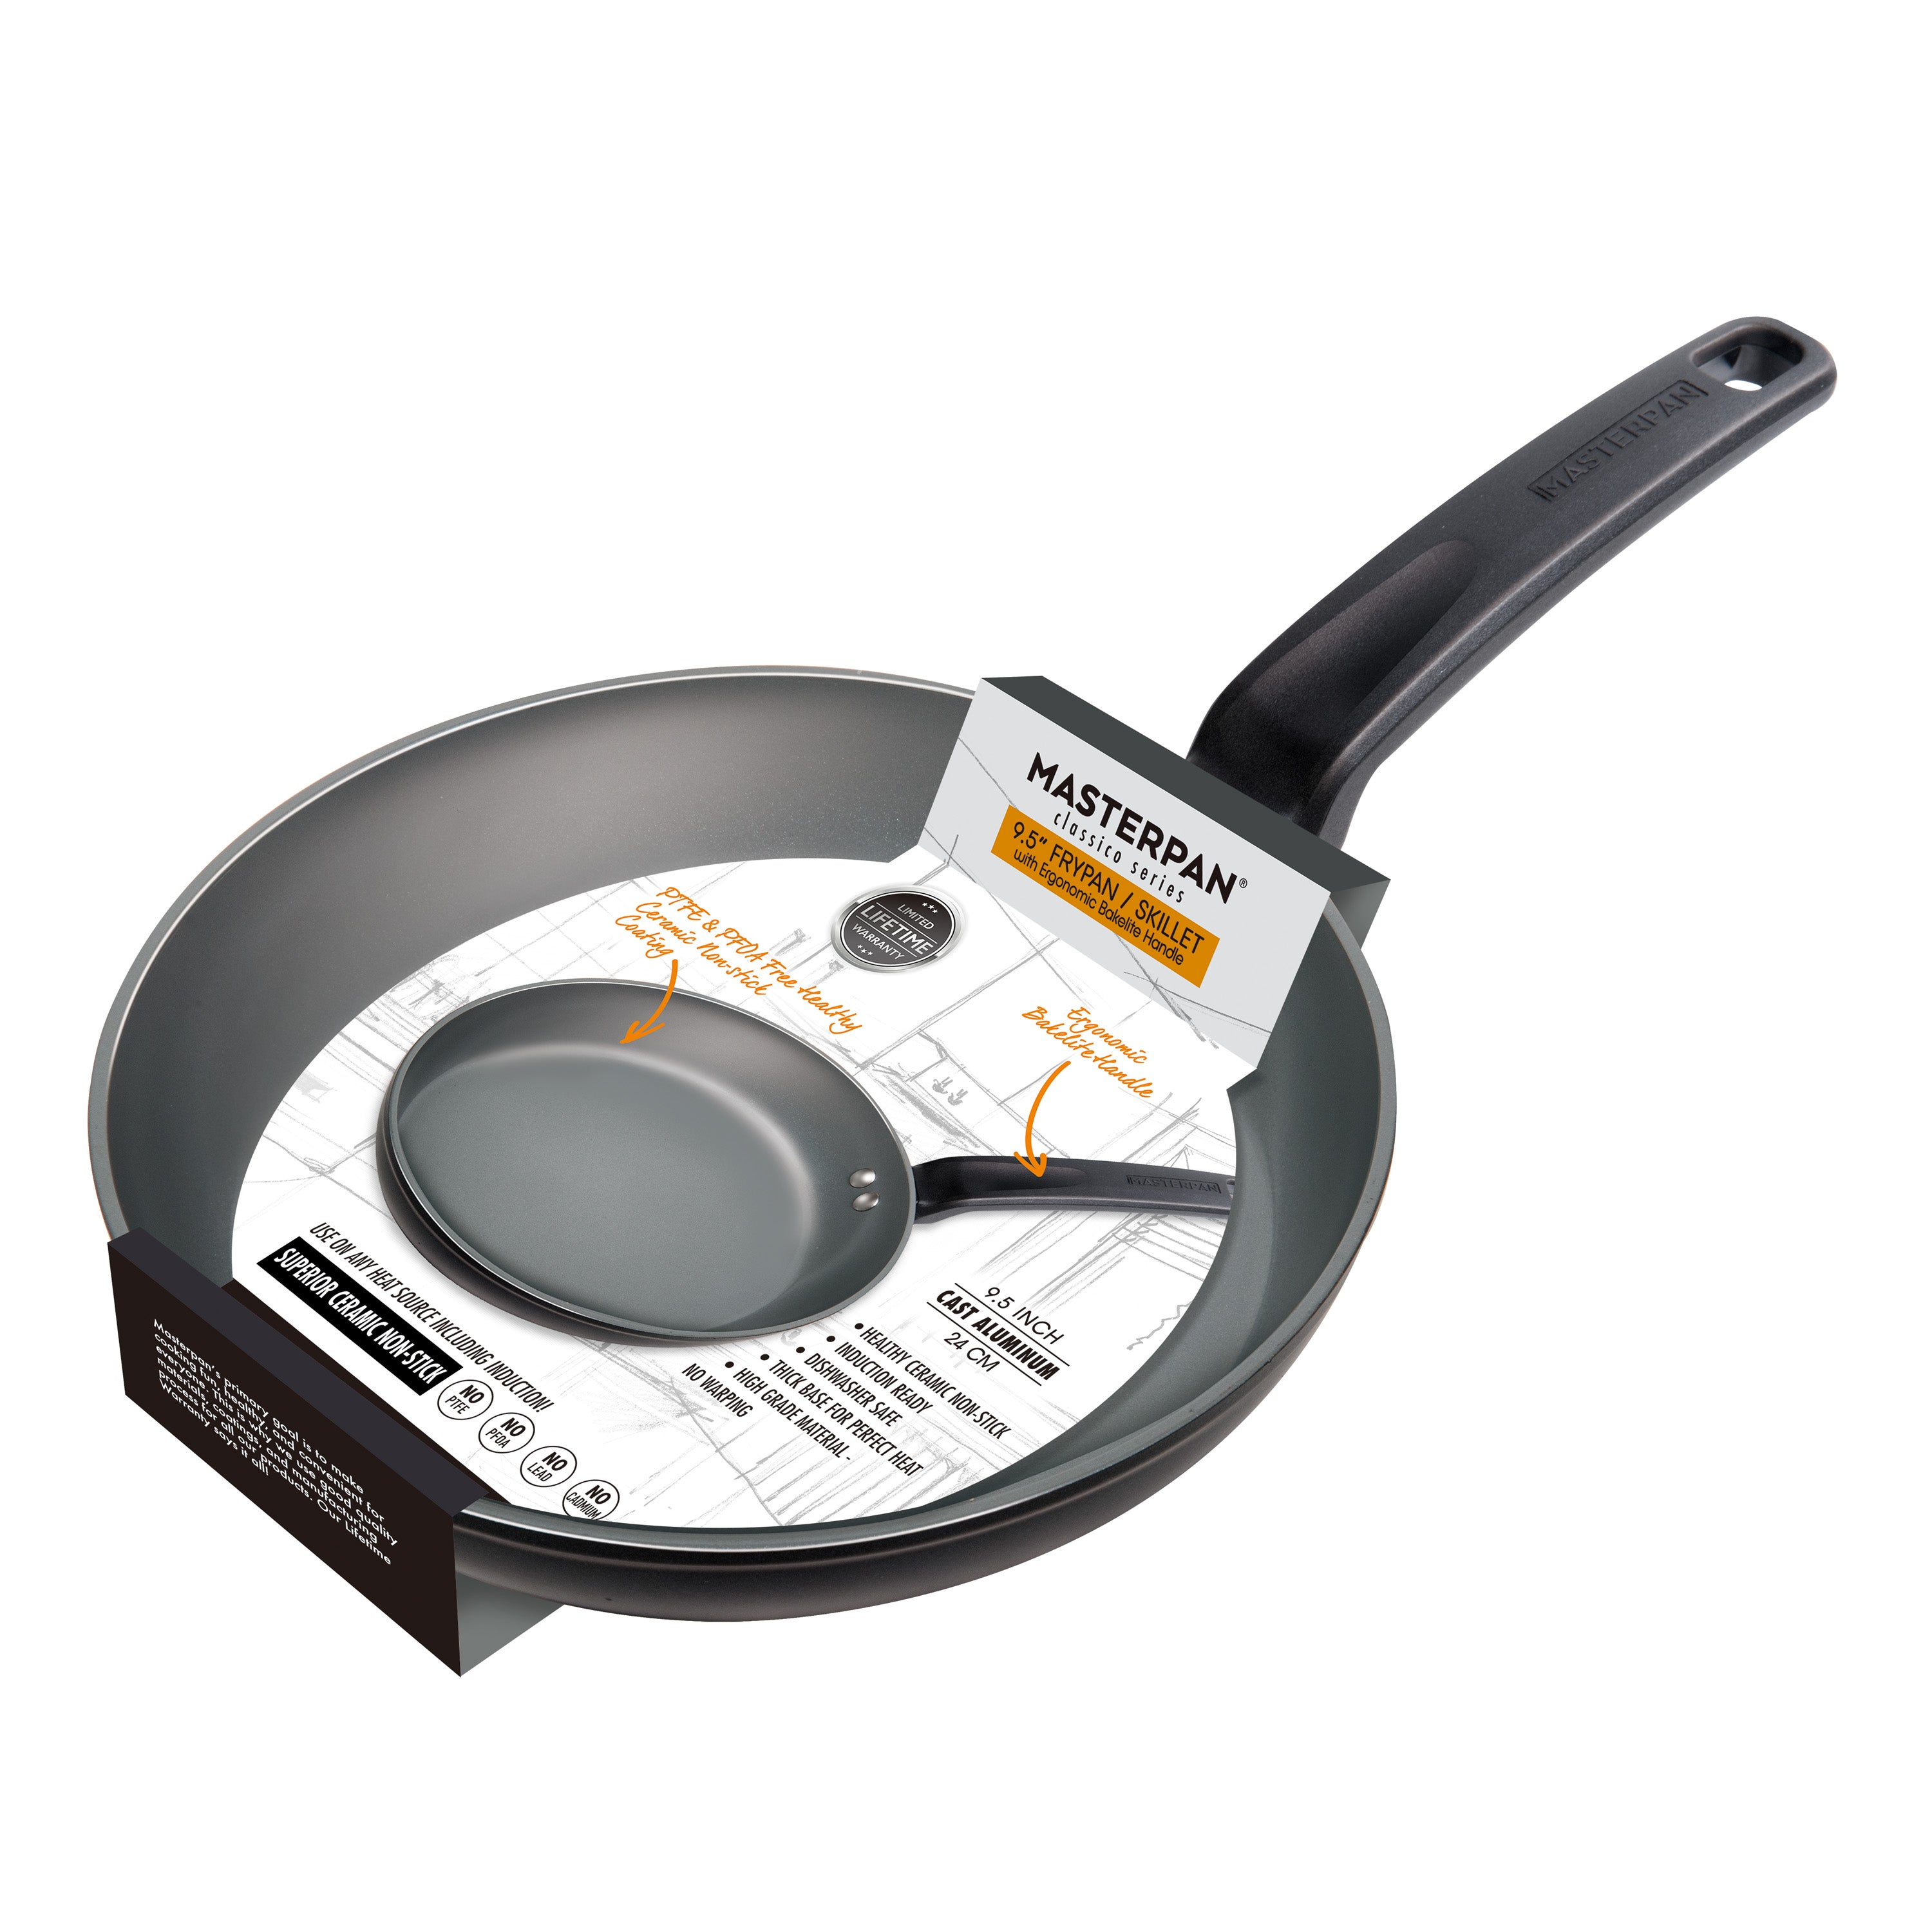 ZYLISS Cookware 11 Nonstick Fry Pan - Oven, Dishwasher, Induction and  Metal Utensil Safe Cooking - Heavy Duty Forged Aluminum with Sturdy Riveted